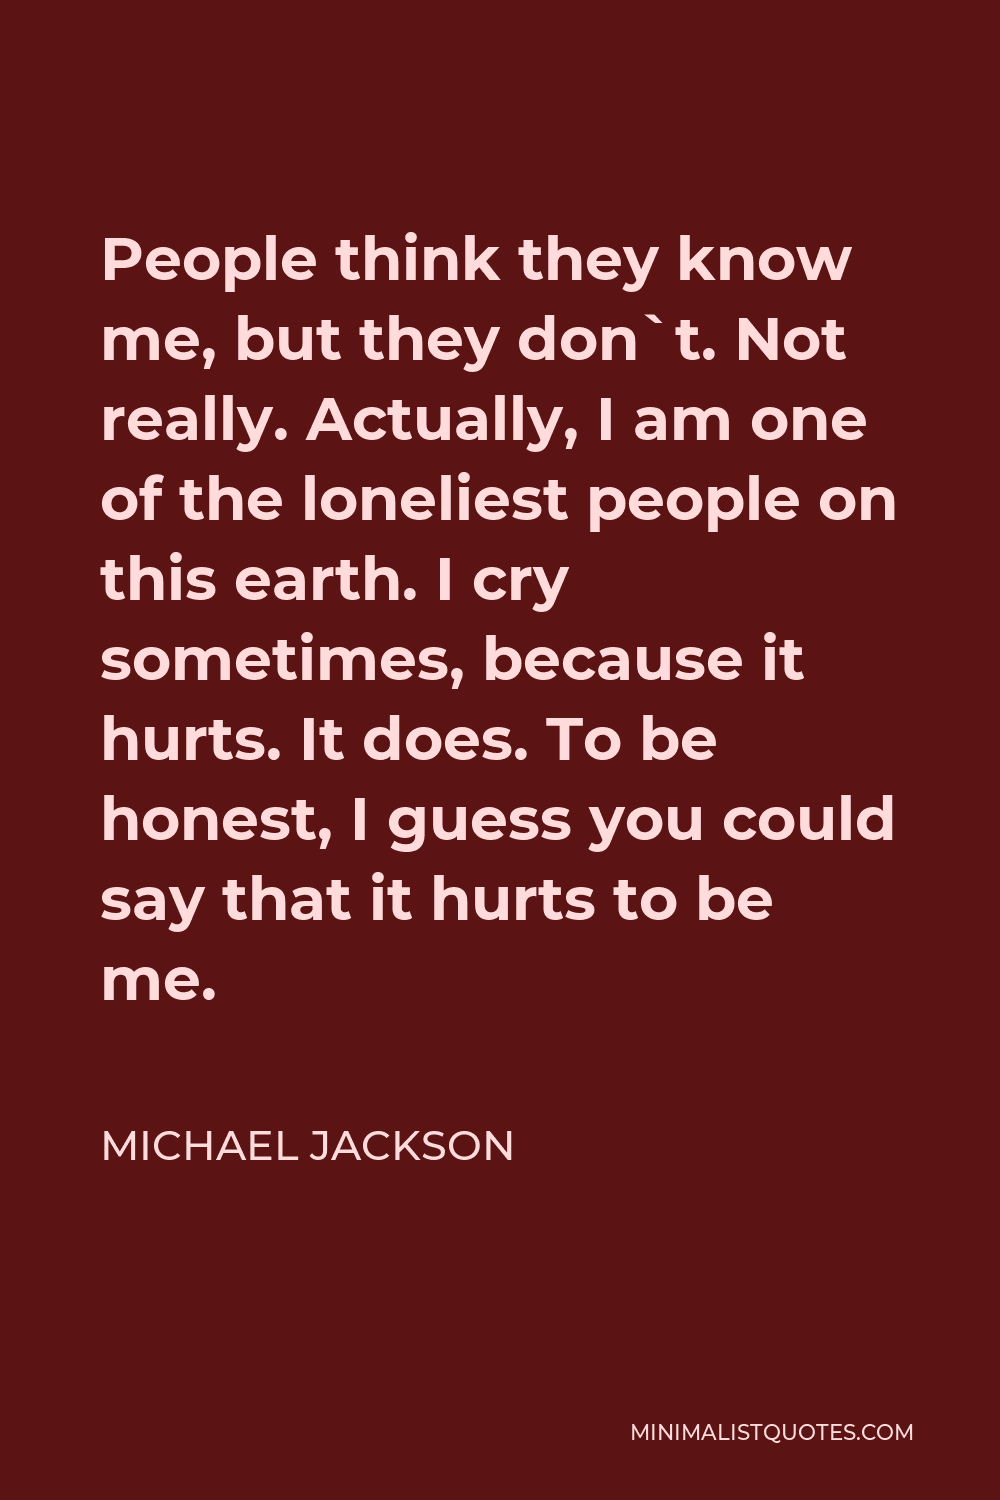 Michael Jackson Quote - People think they know me, but they don`t. Not really. Actually, I am one of the loneliest people on this earth. I cry sometimes, because it hurts. It does. To be honest, I guess you could say that it hurts to be me.